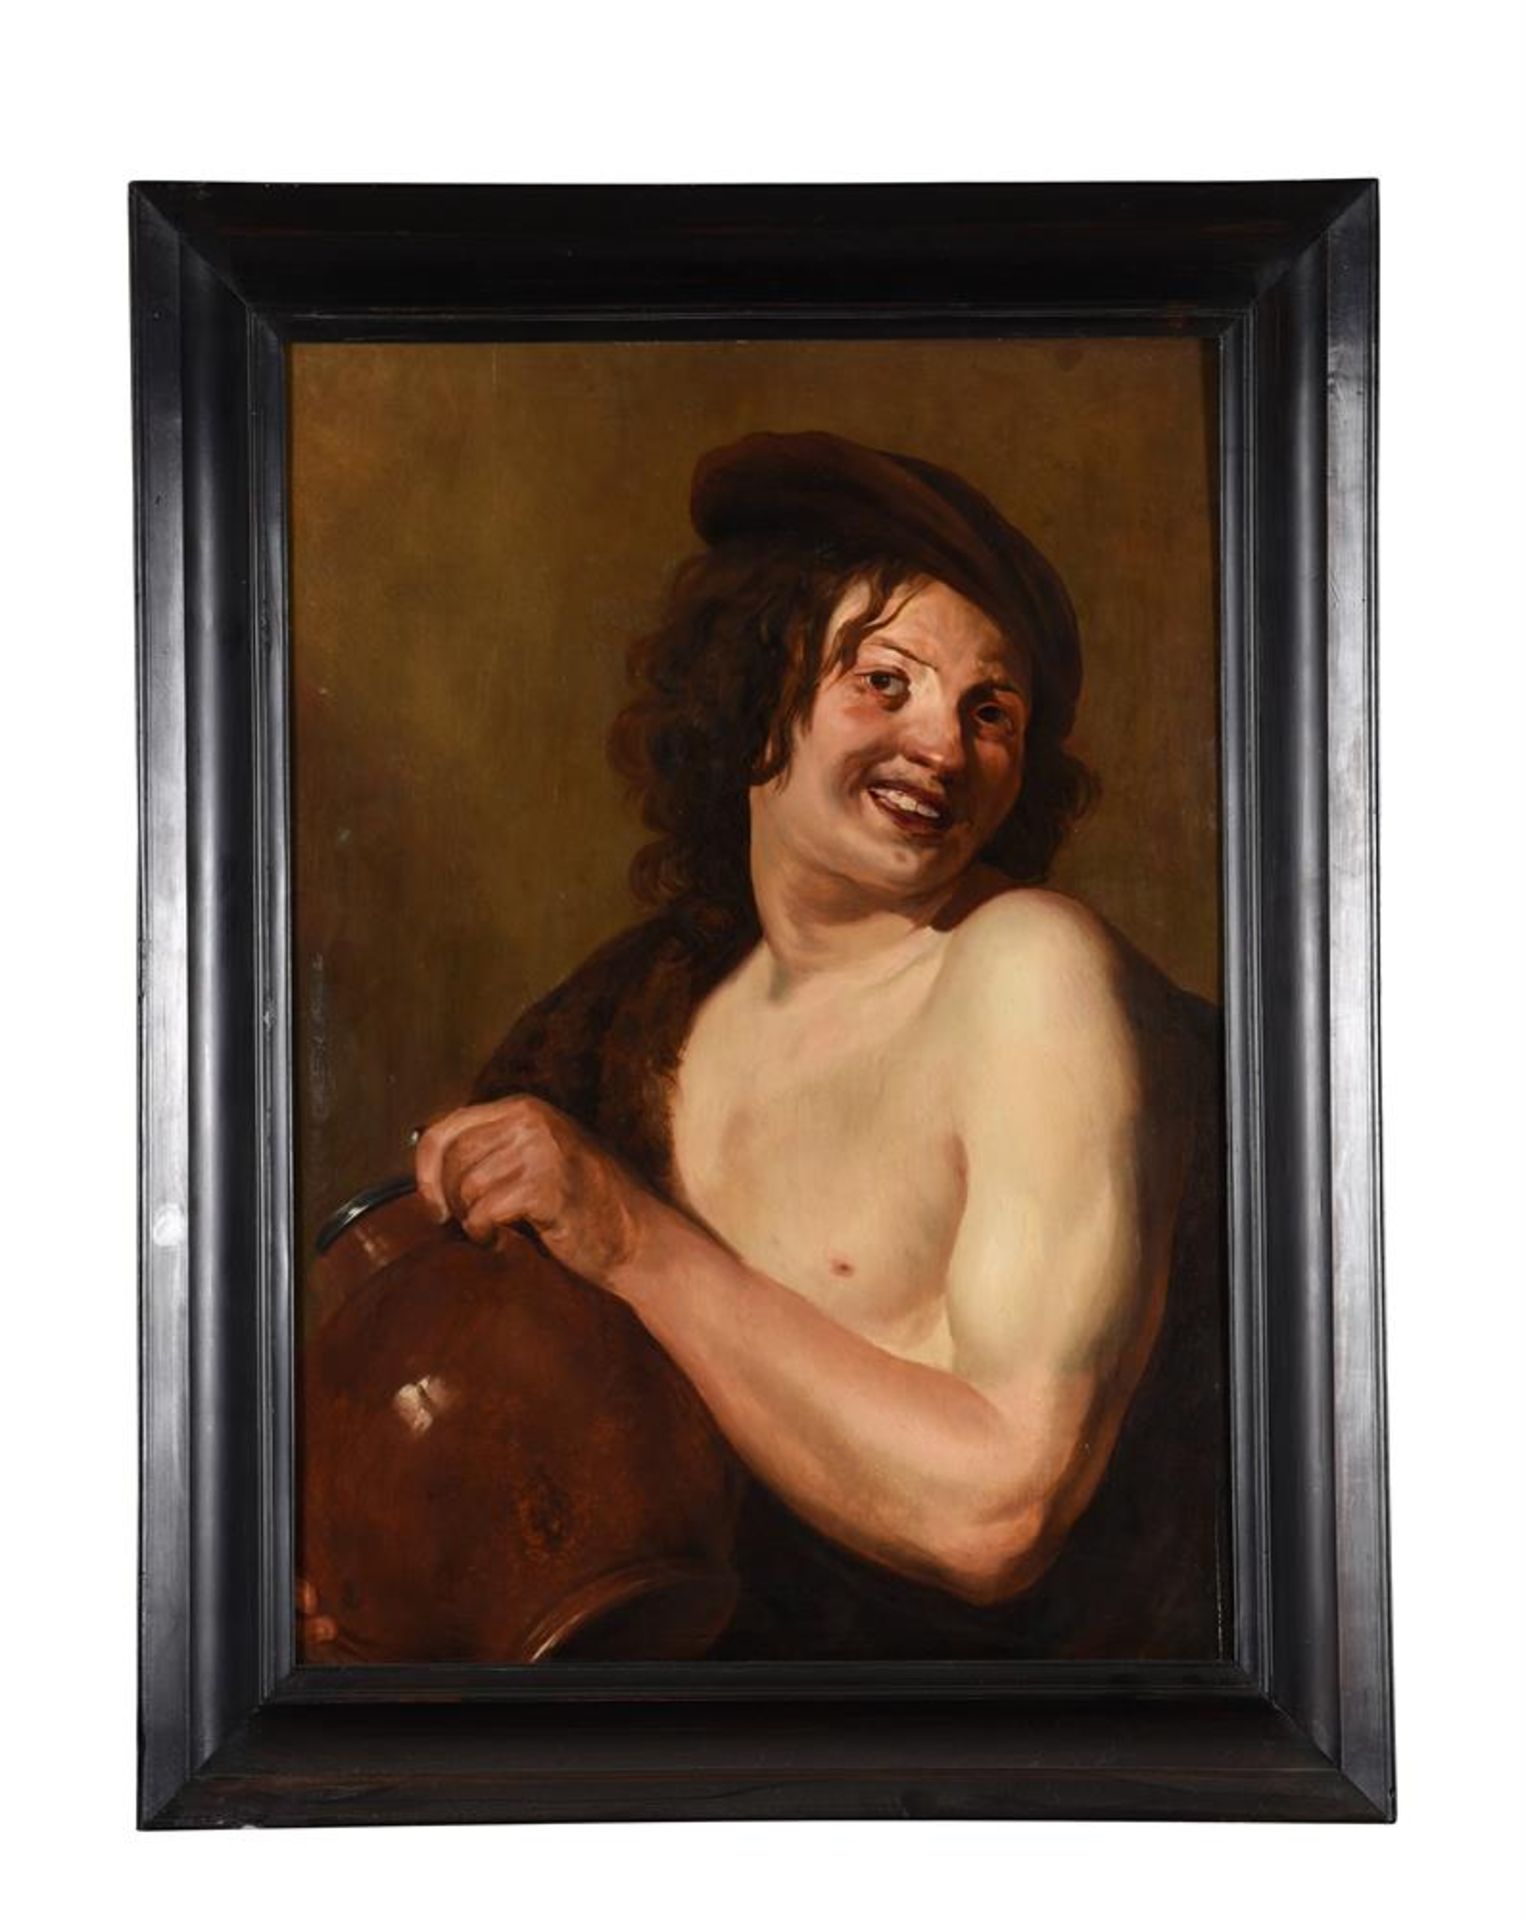 CIRCLE OF THEODOOR ROMBOUTS (FLEMISH 1597-1637), PORTRAIT OF A BOY HOLDING A JUG OF ALE - Image 2 of 4